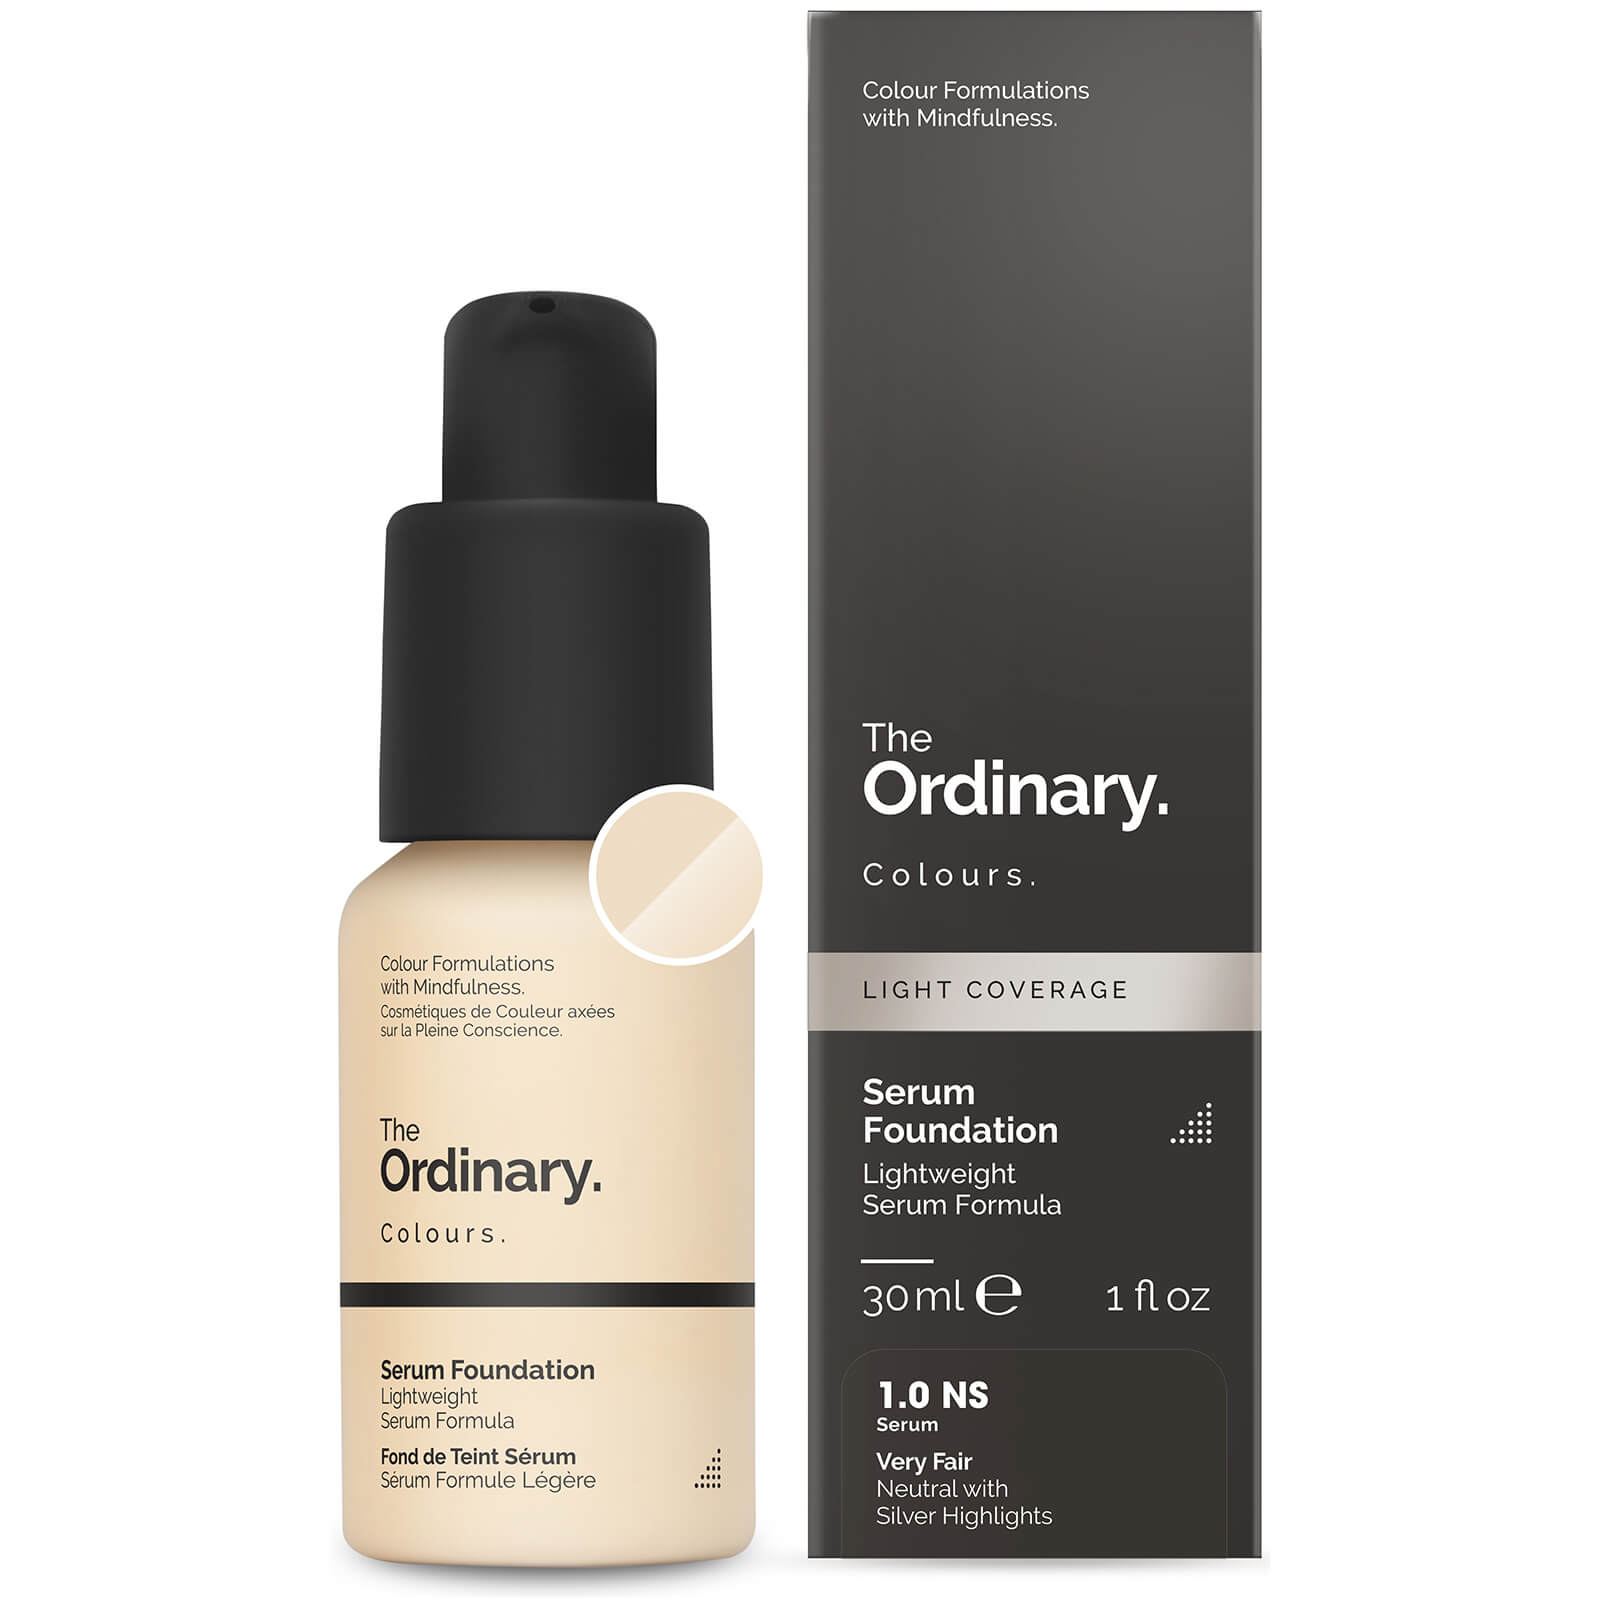 The Ordinary Serum Foundation with SPF 15 by The Ordinary Colours 30ml (Various Shades) - 2.0YG